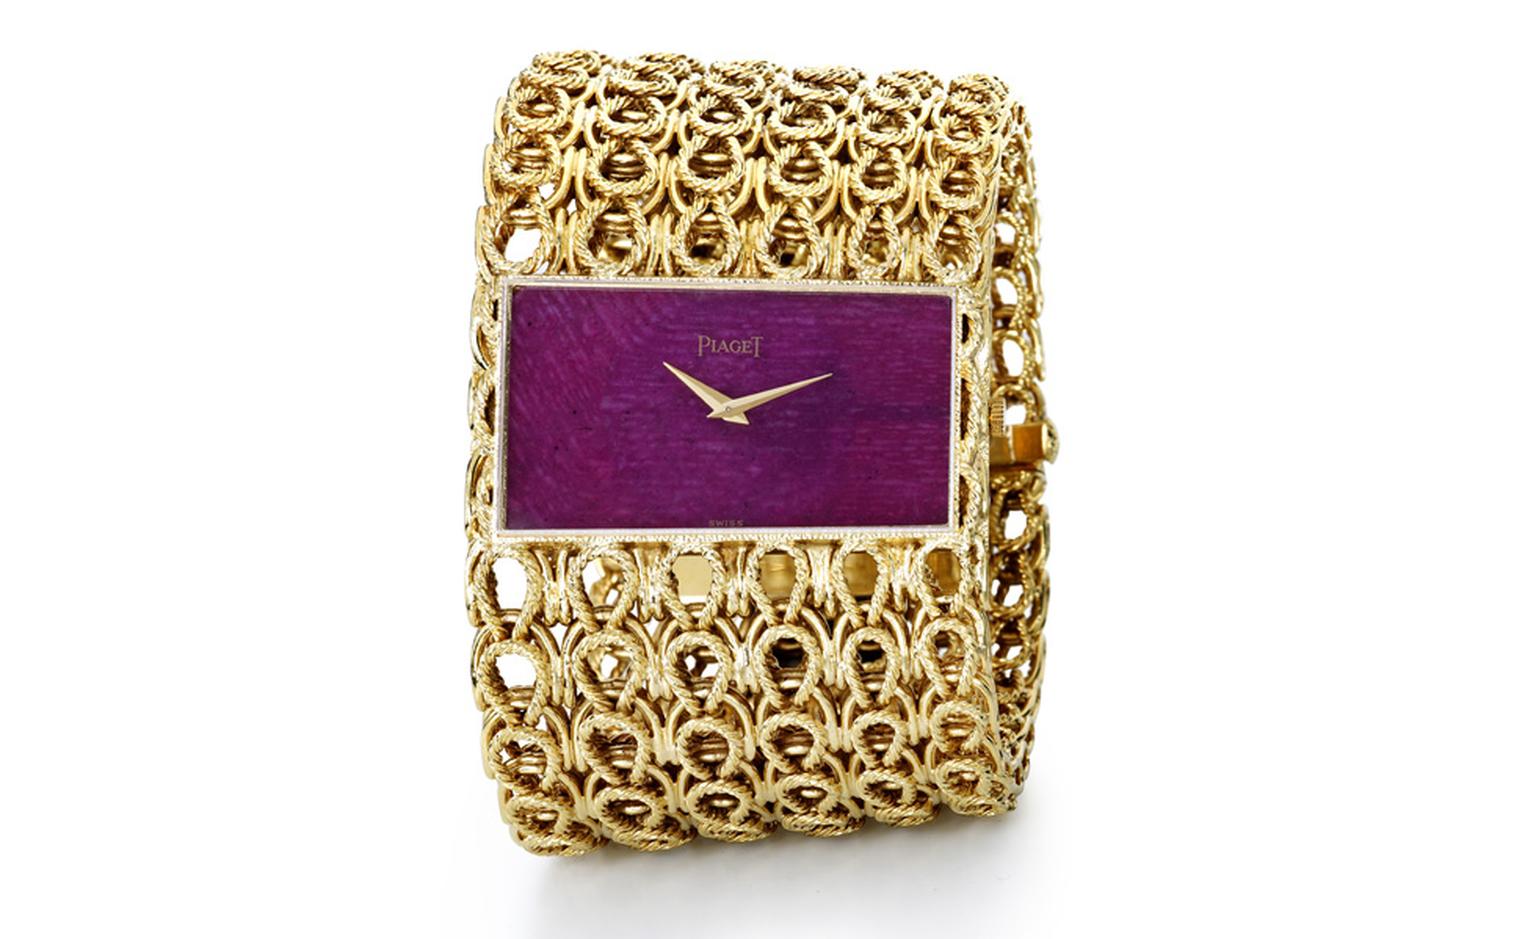 Piaget Cuff 1970 yellow gold cuff watch with ruby dial and Piaget ultra-thin mechanical movement 9P. Piaget Private Collection.